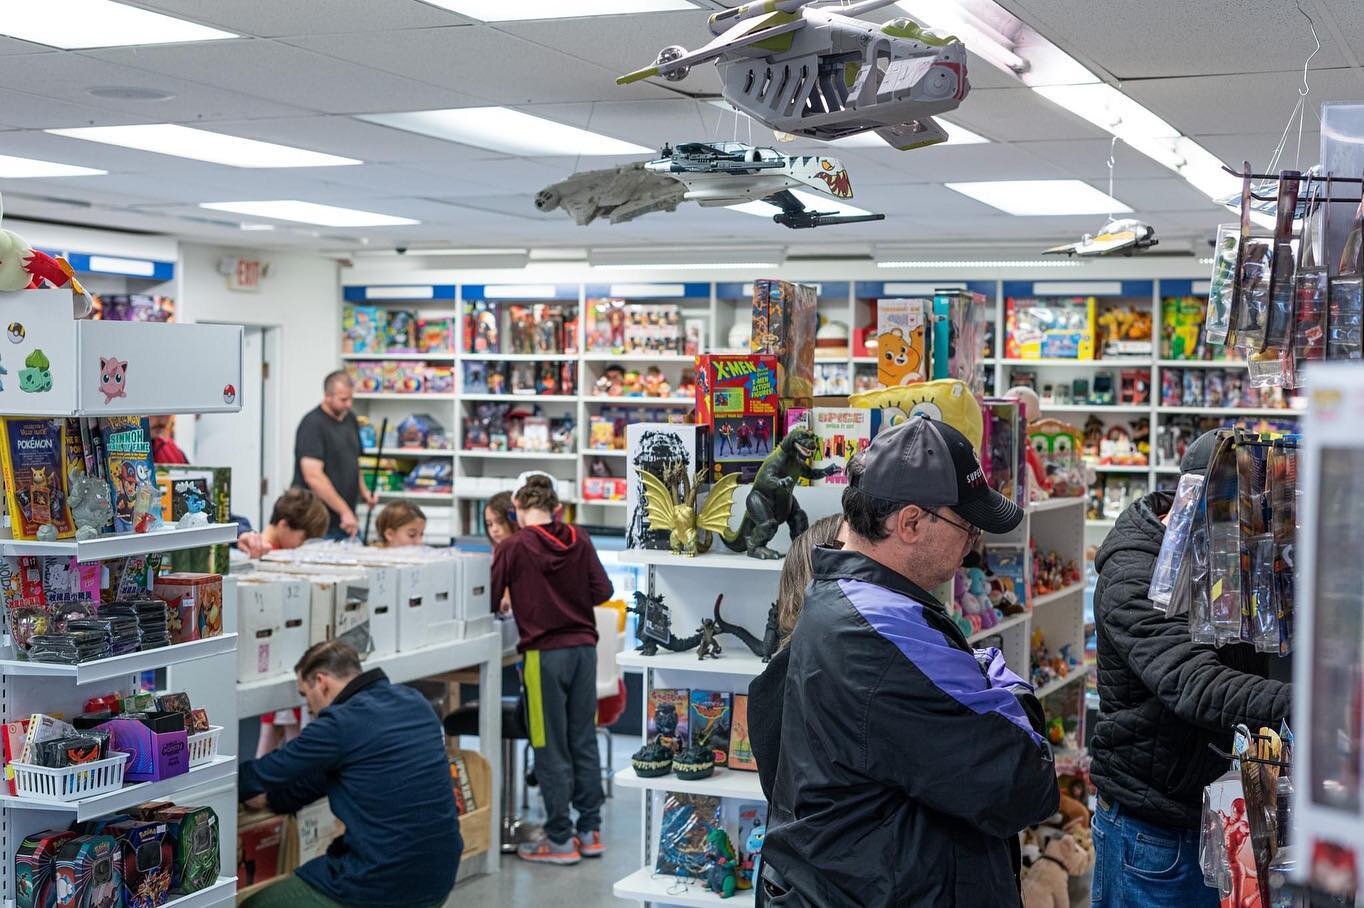 @jayhawkcoinsgamesandmore wants to thank everyone who came out this weekend for #blackfriday and #smallbusinesssaturday 

#jayhawk #coins #games #more #videogames #actionfigures #vintagefigures #games #toys #funko #funkopop #pop #pops #comicbooks #ca